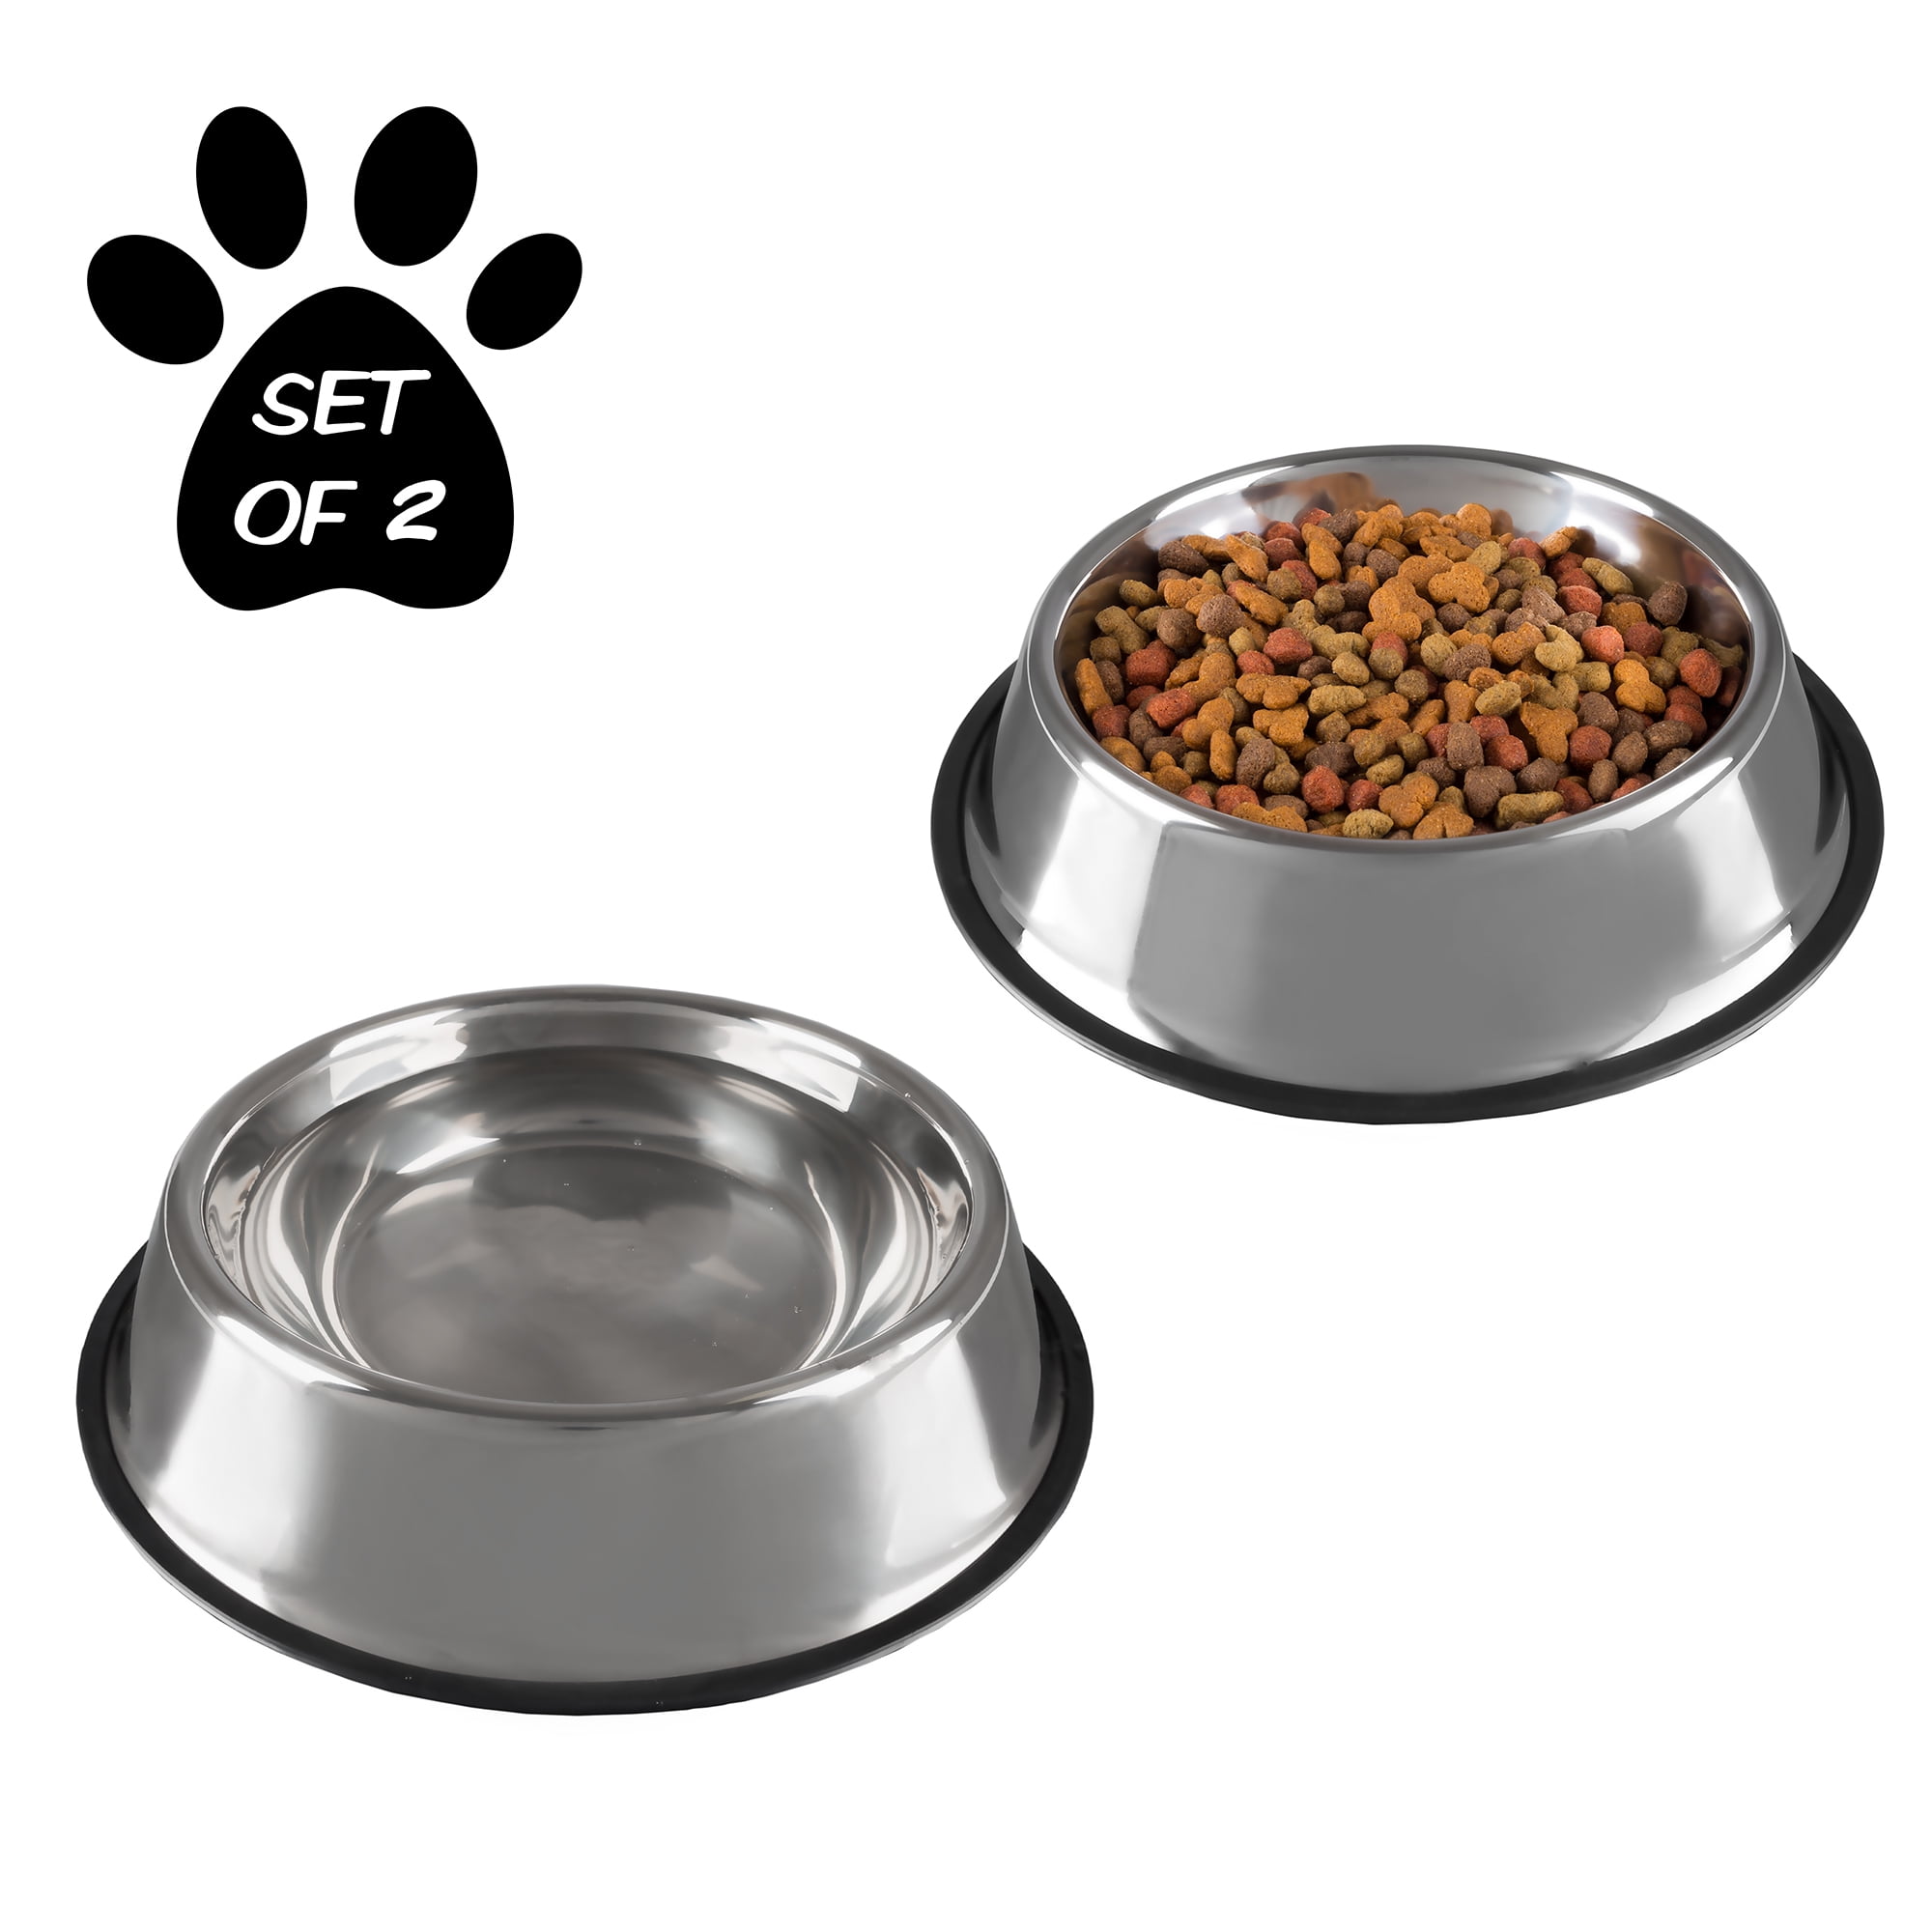 Gteller 32oz 64oz Stainless Steel Double Wall Dog Bowls,BPA Free Non-Slip Pet Dishes,Cat Food&Water Bowl with Rubber Base 64oz, Grey 